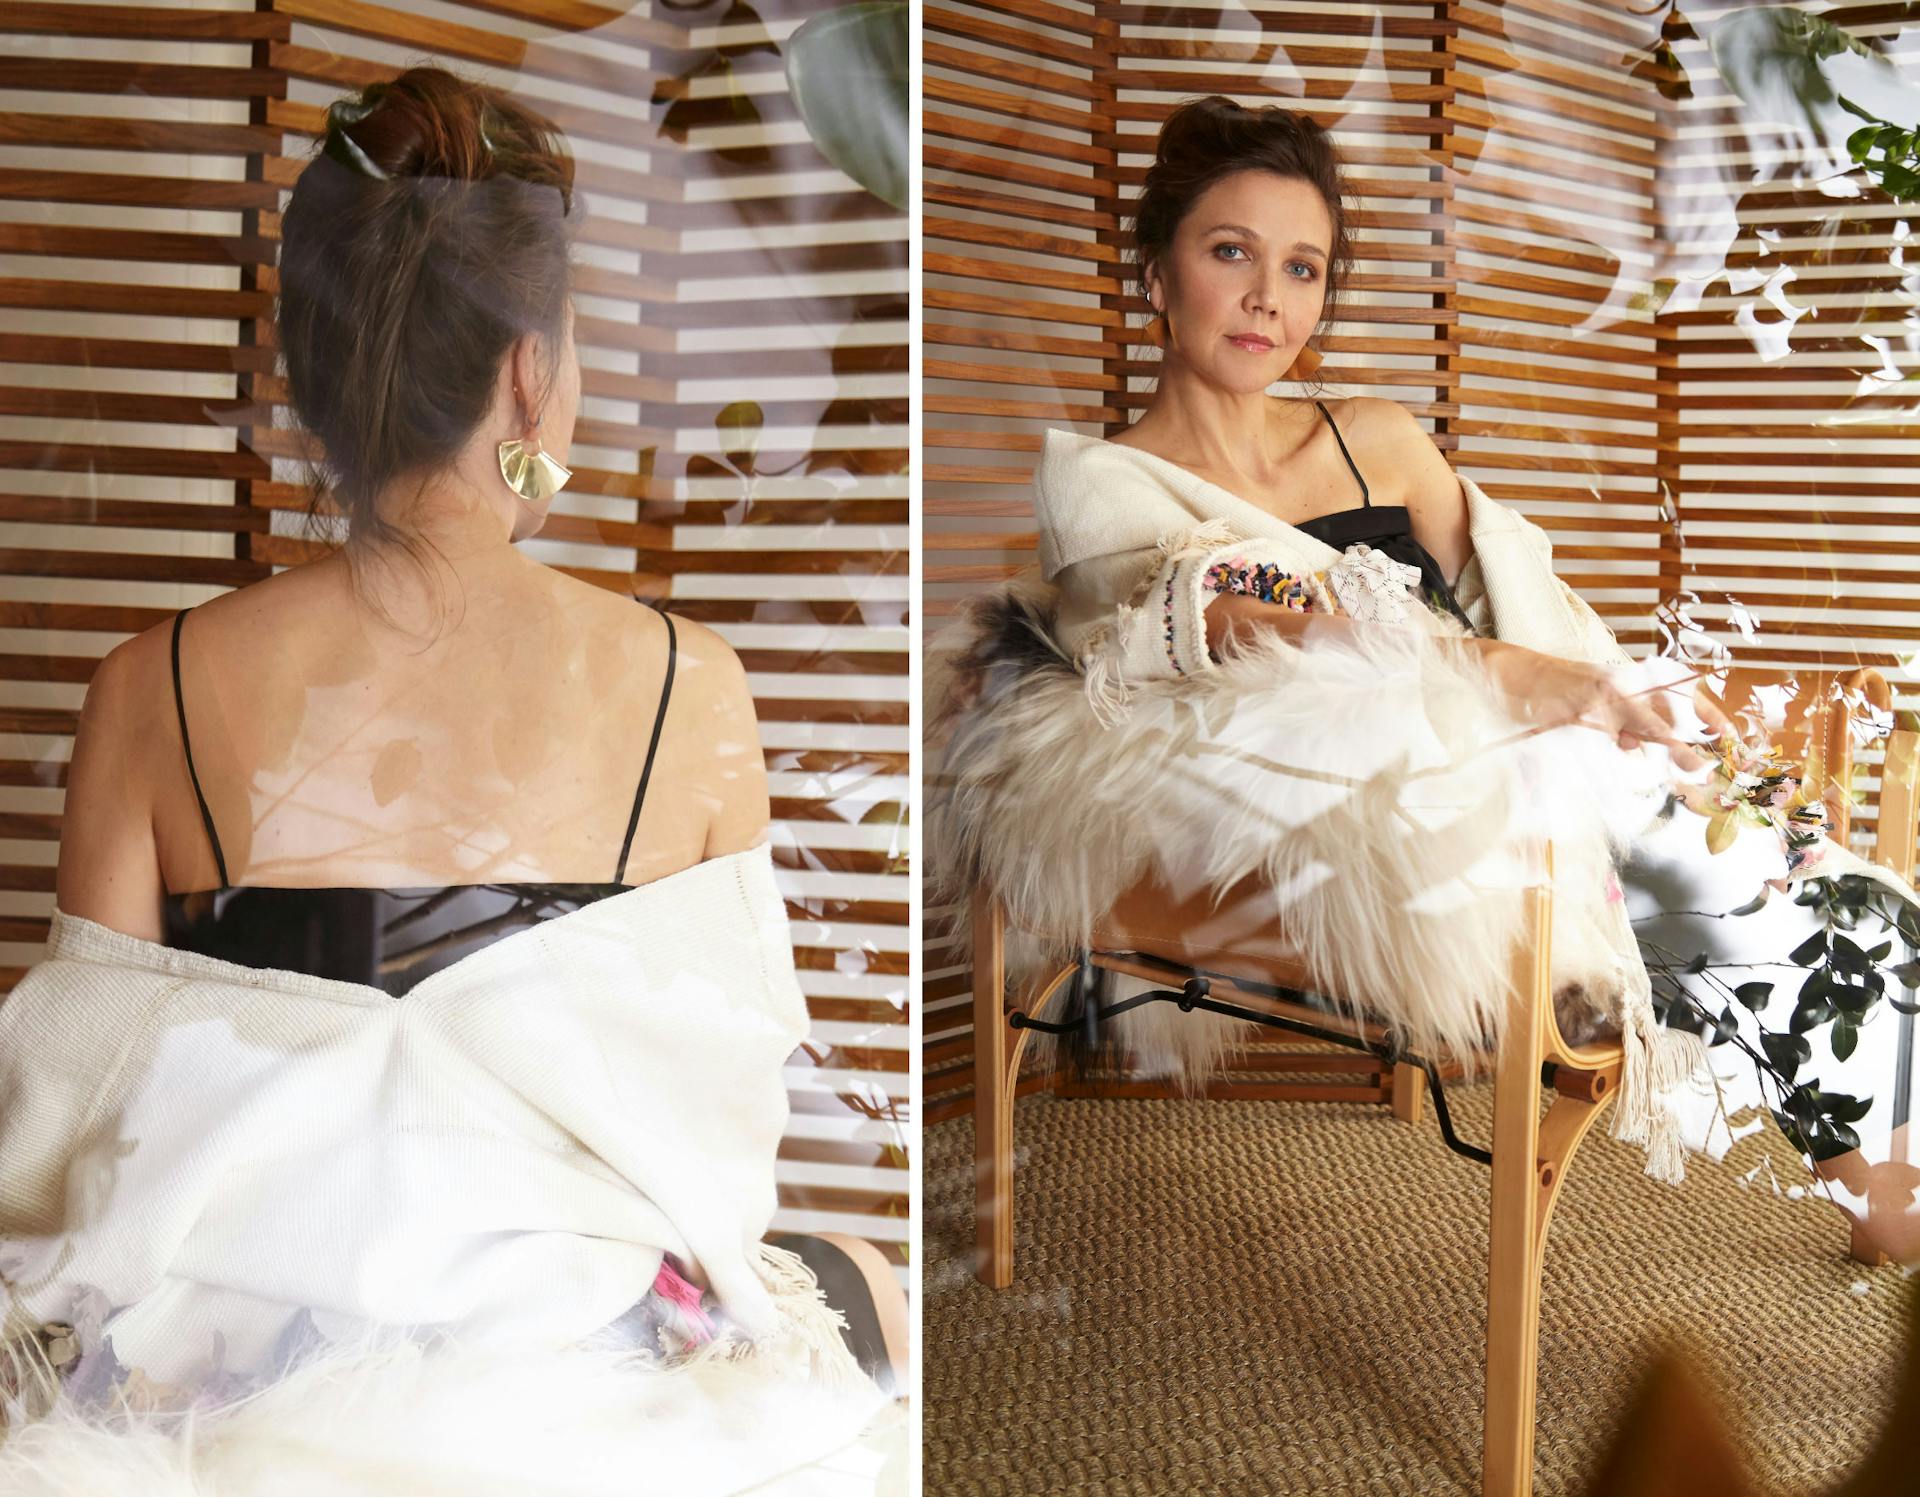 Two images. First is Maggie Gyllenhaal facing away wearing black and white. The second shows Maggie Gyllenhaal sitting on a chair wearing black and white.